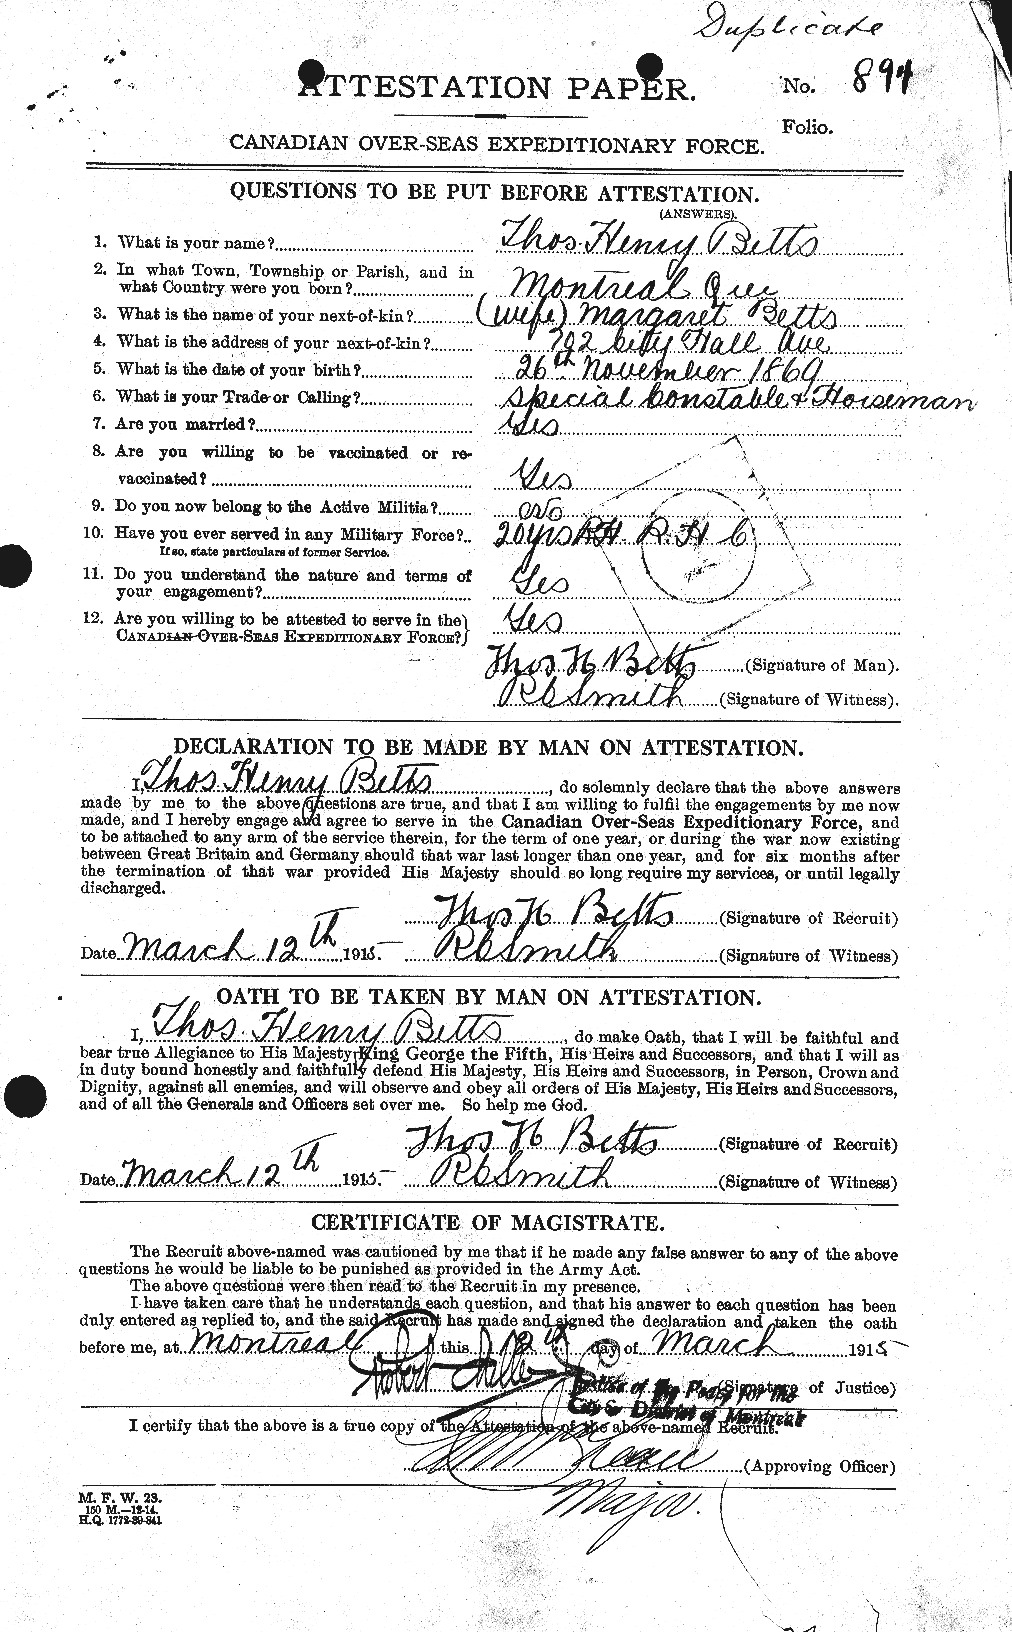 Personnel Records of the First World War - CEF 237207a